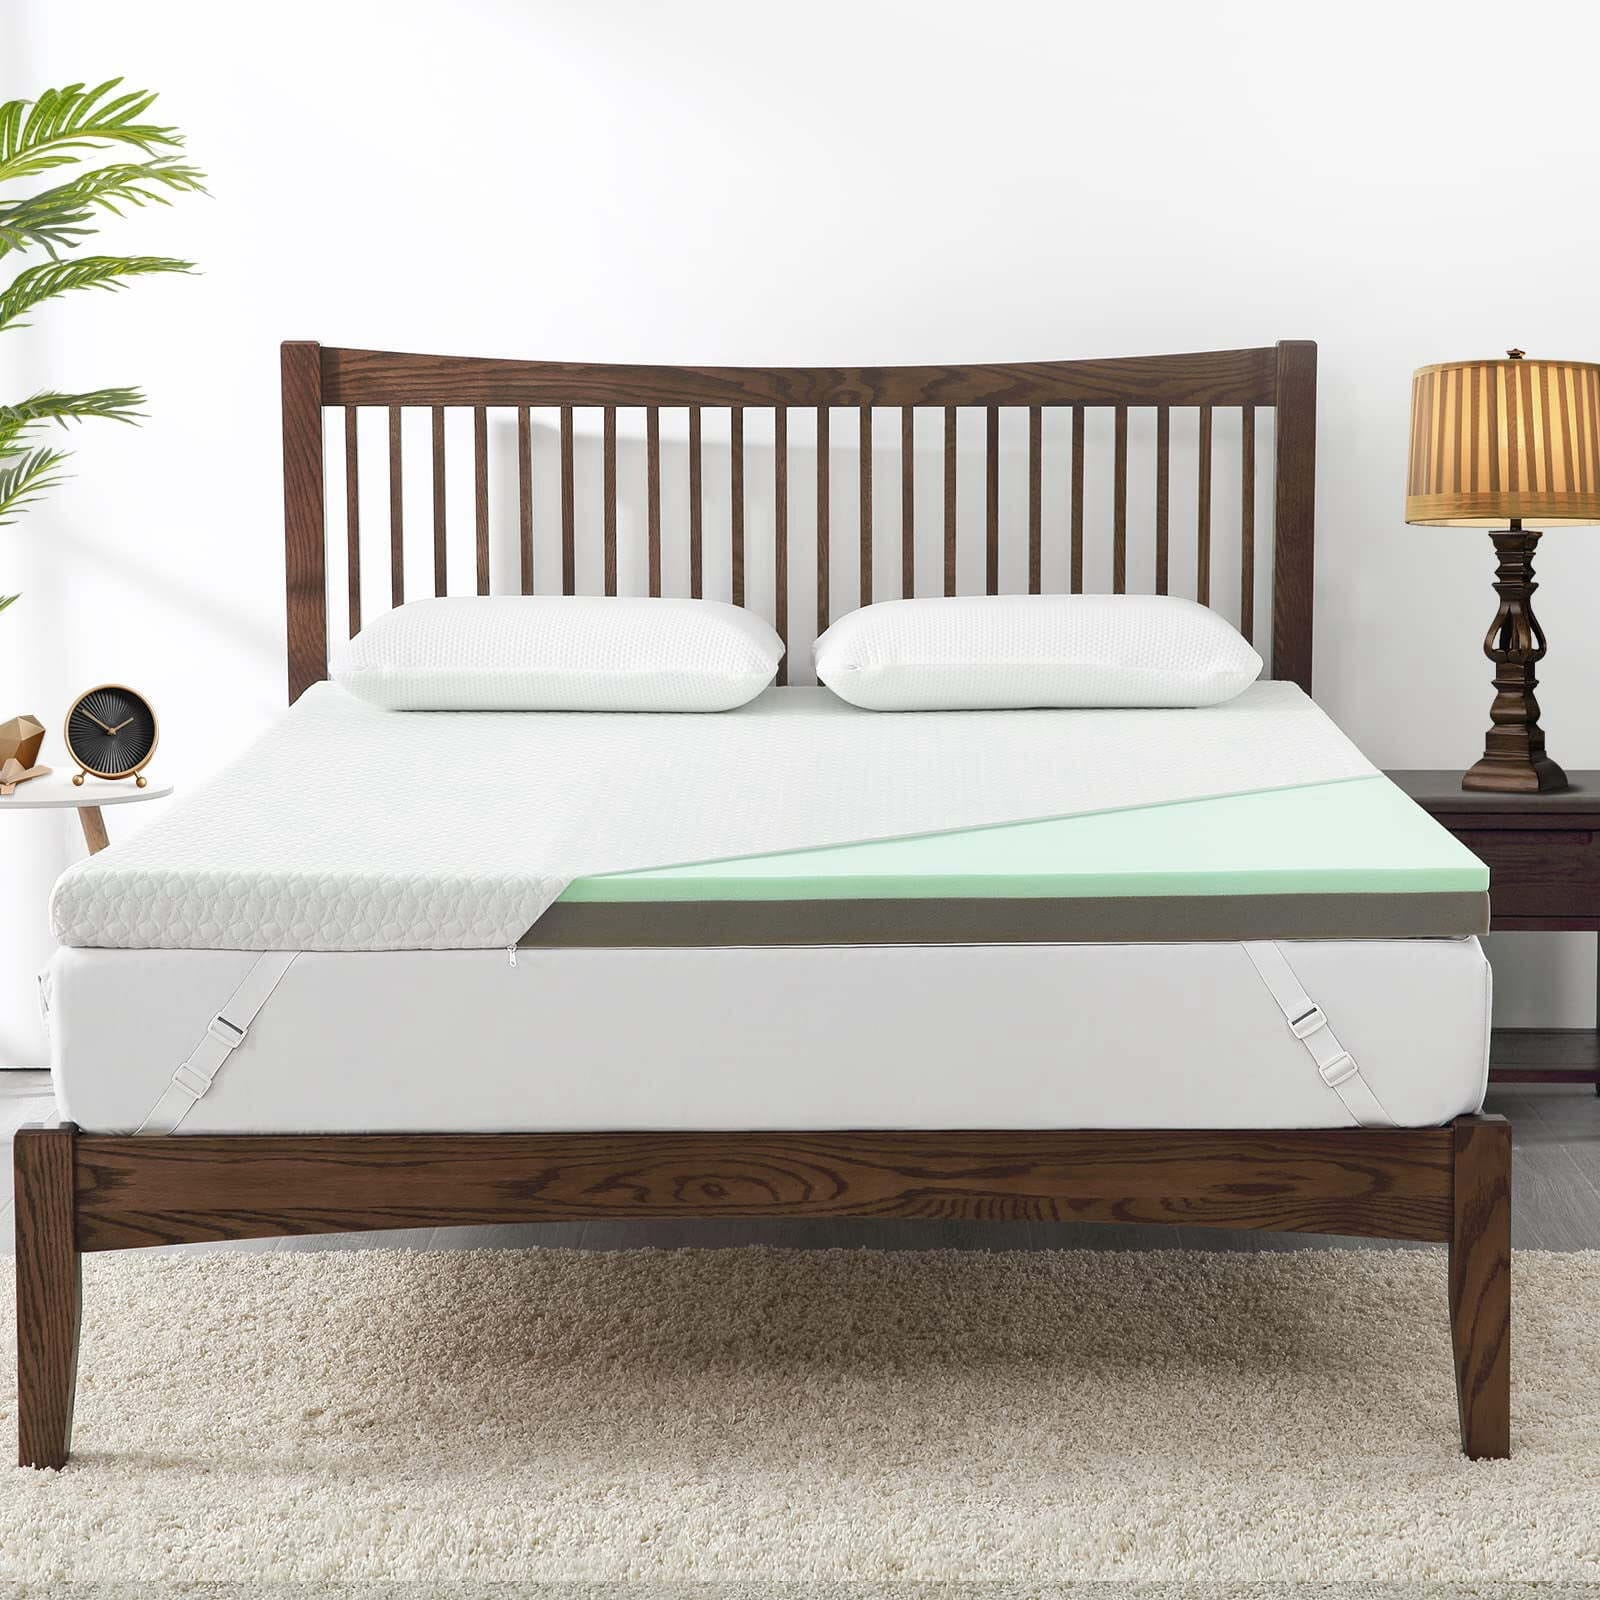 https://ak1.ostkcdn.com/images/products/is/images/direct/6dbae2e2e15cb610d7e1d9da1a3e8725aa1c670d/Dual-Layer-Memory-Foam-Mattress-Topper-with-Cover.jpg